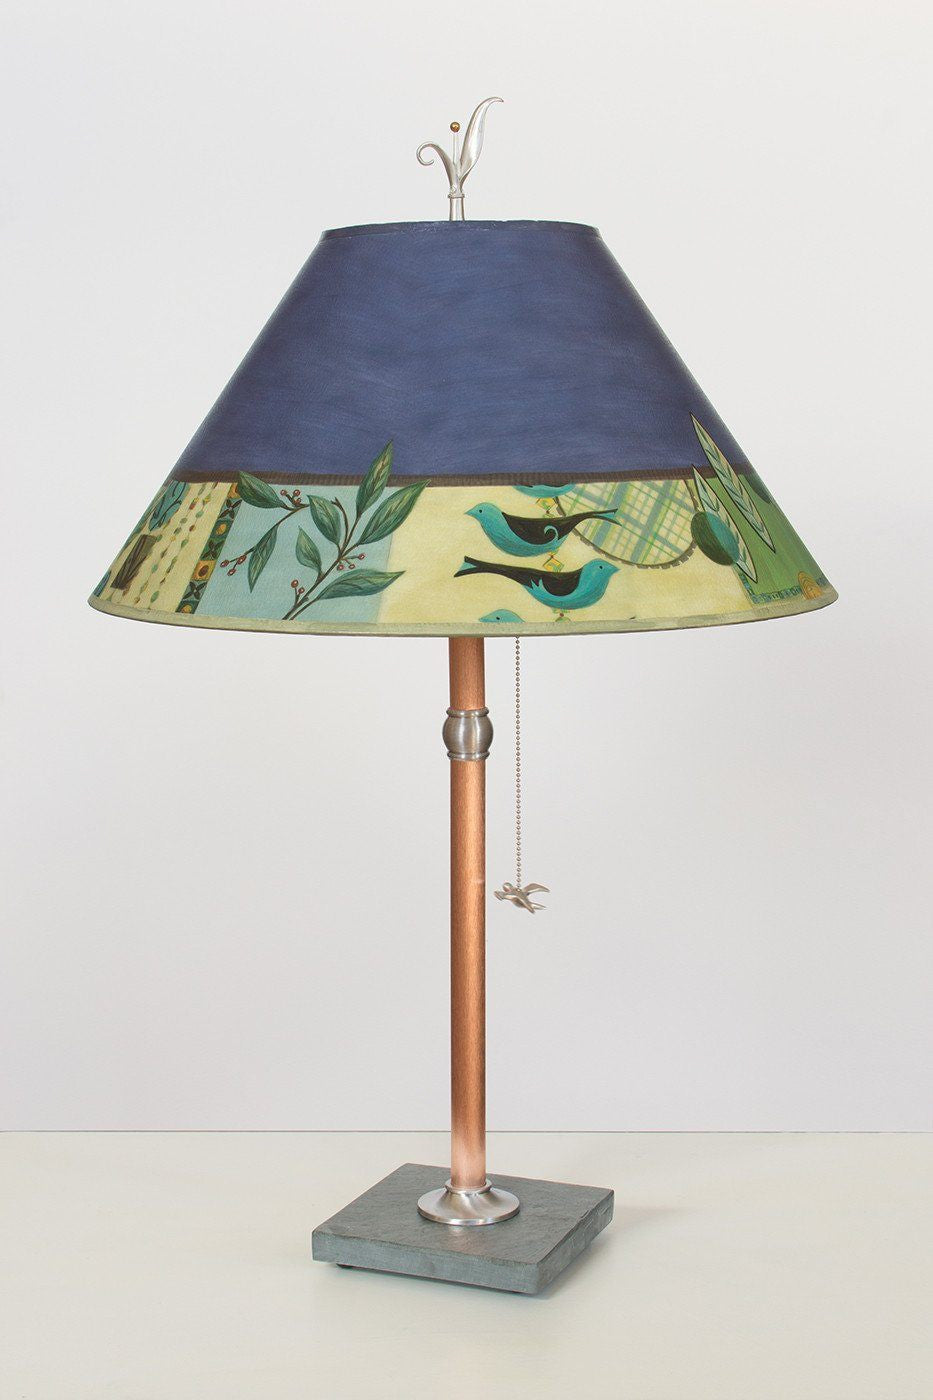 Copper Table Lamp on Vermont Slate with Large Conical Shade in New Capri Periwinkle